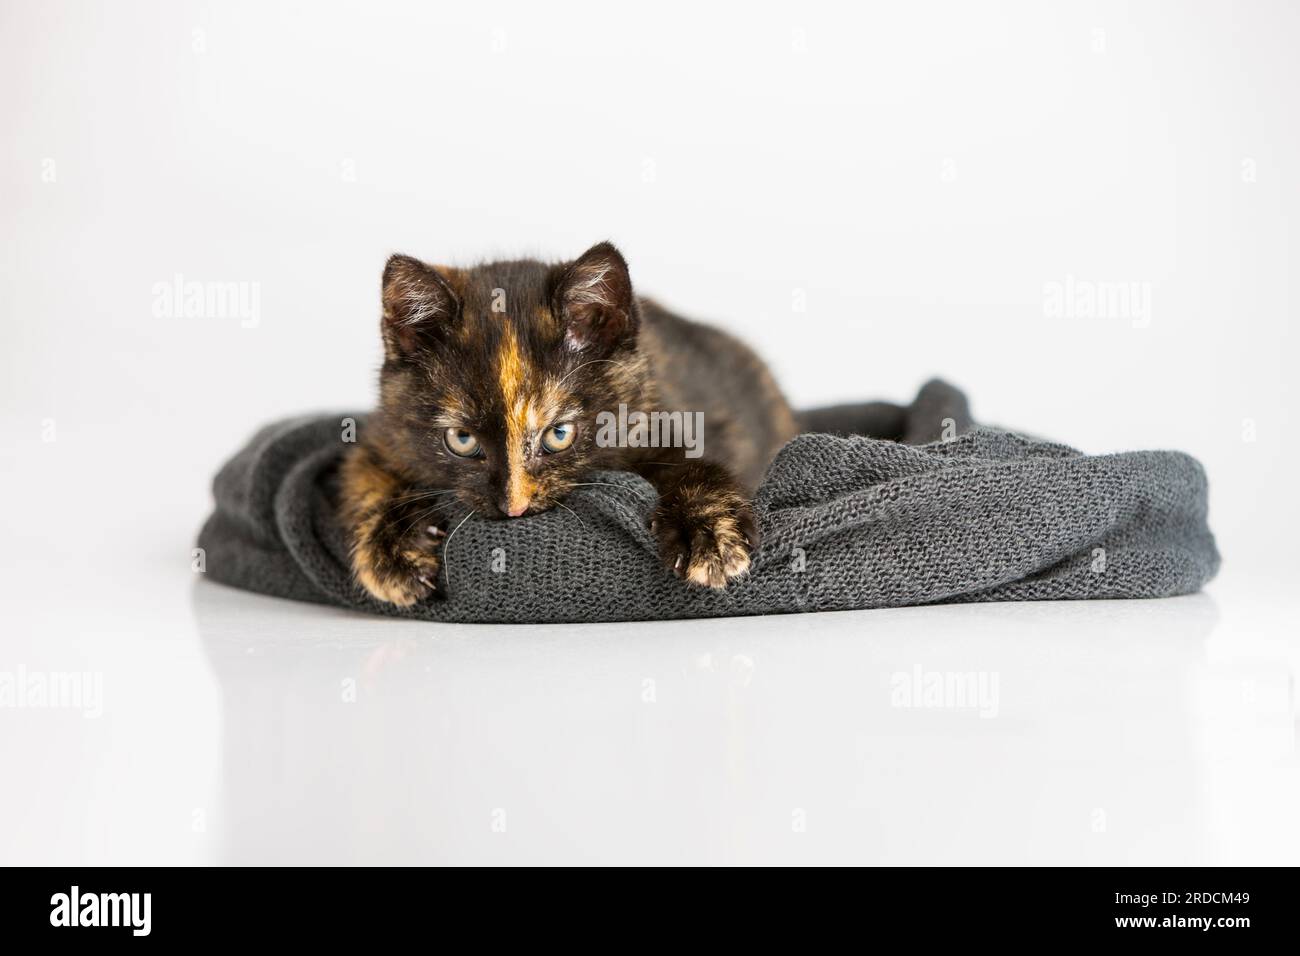 An angry cat in a scarf, defending the right to his property, land. Evil look, full of character, on a white background Stock Photo